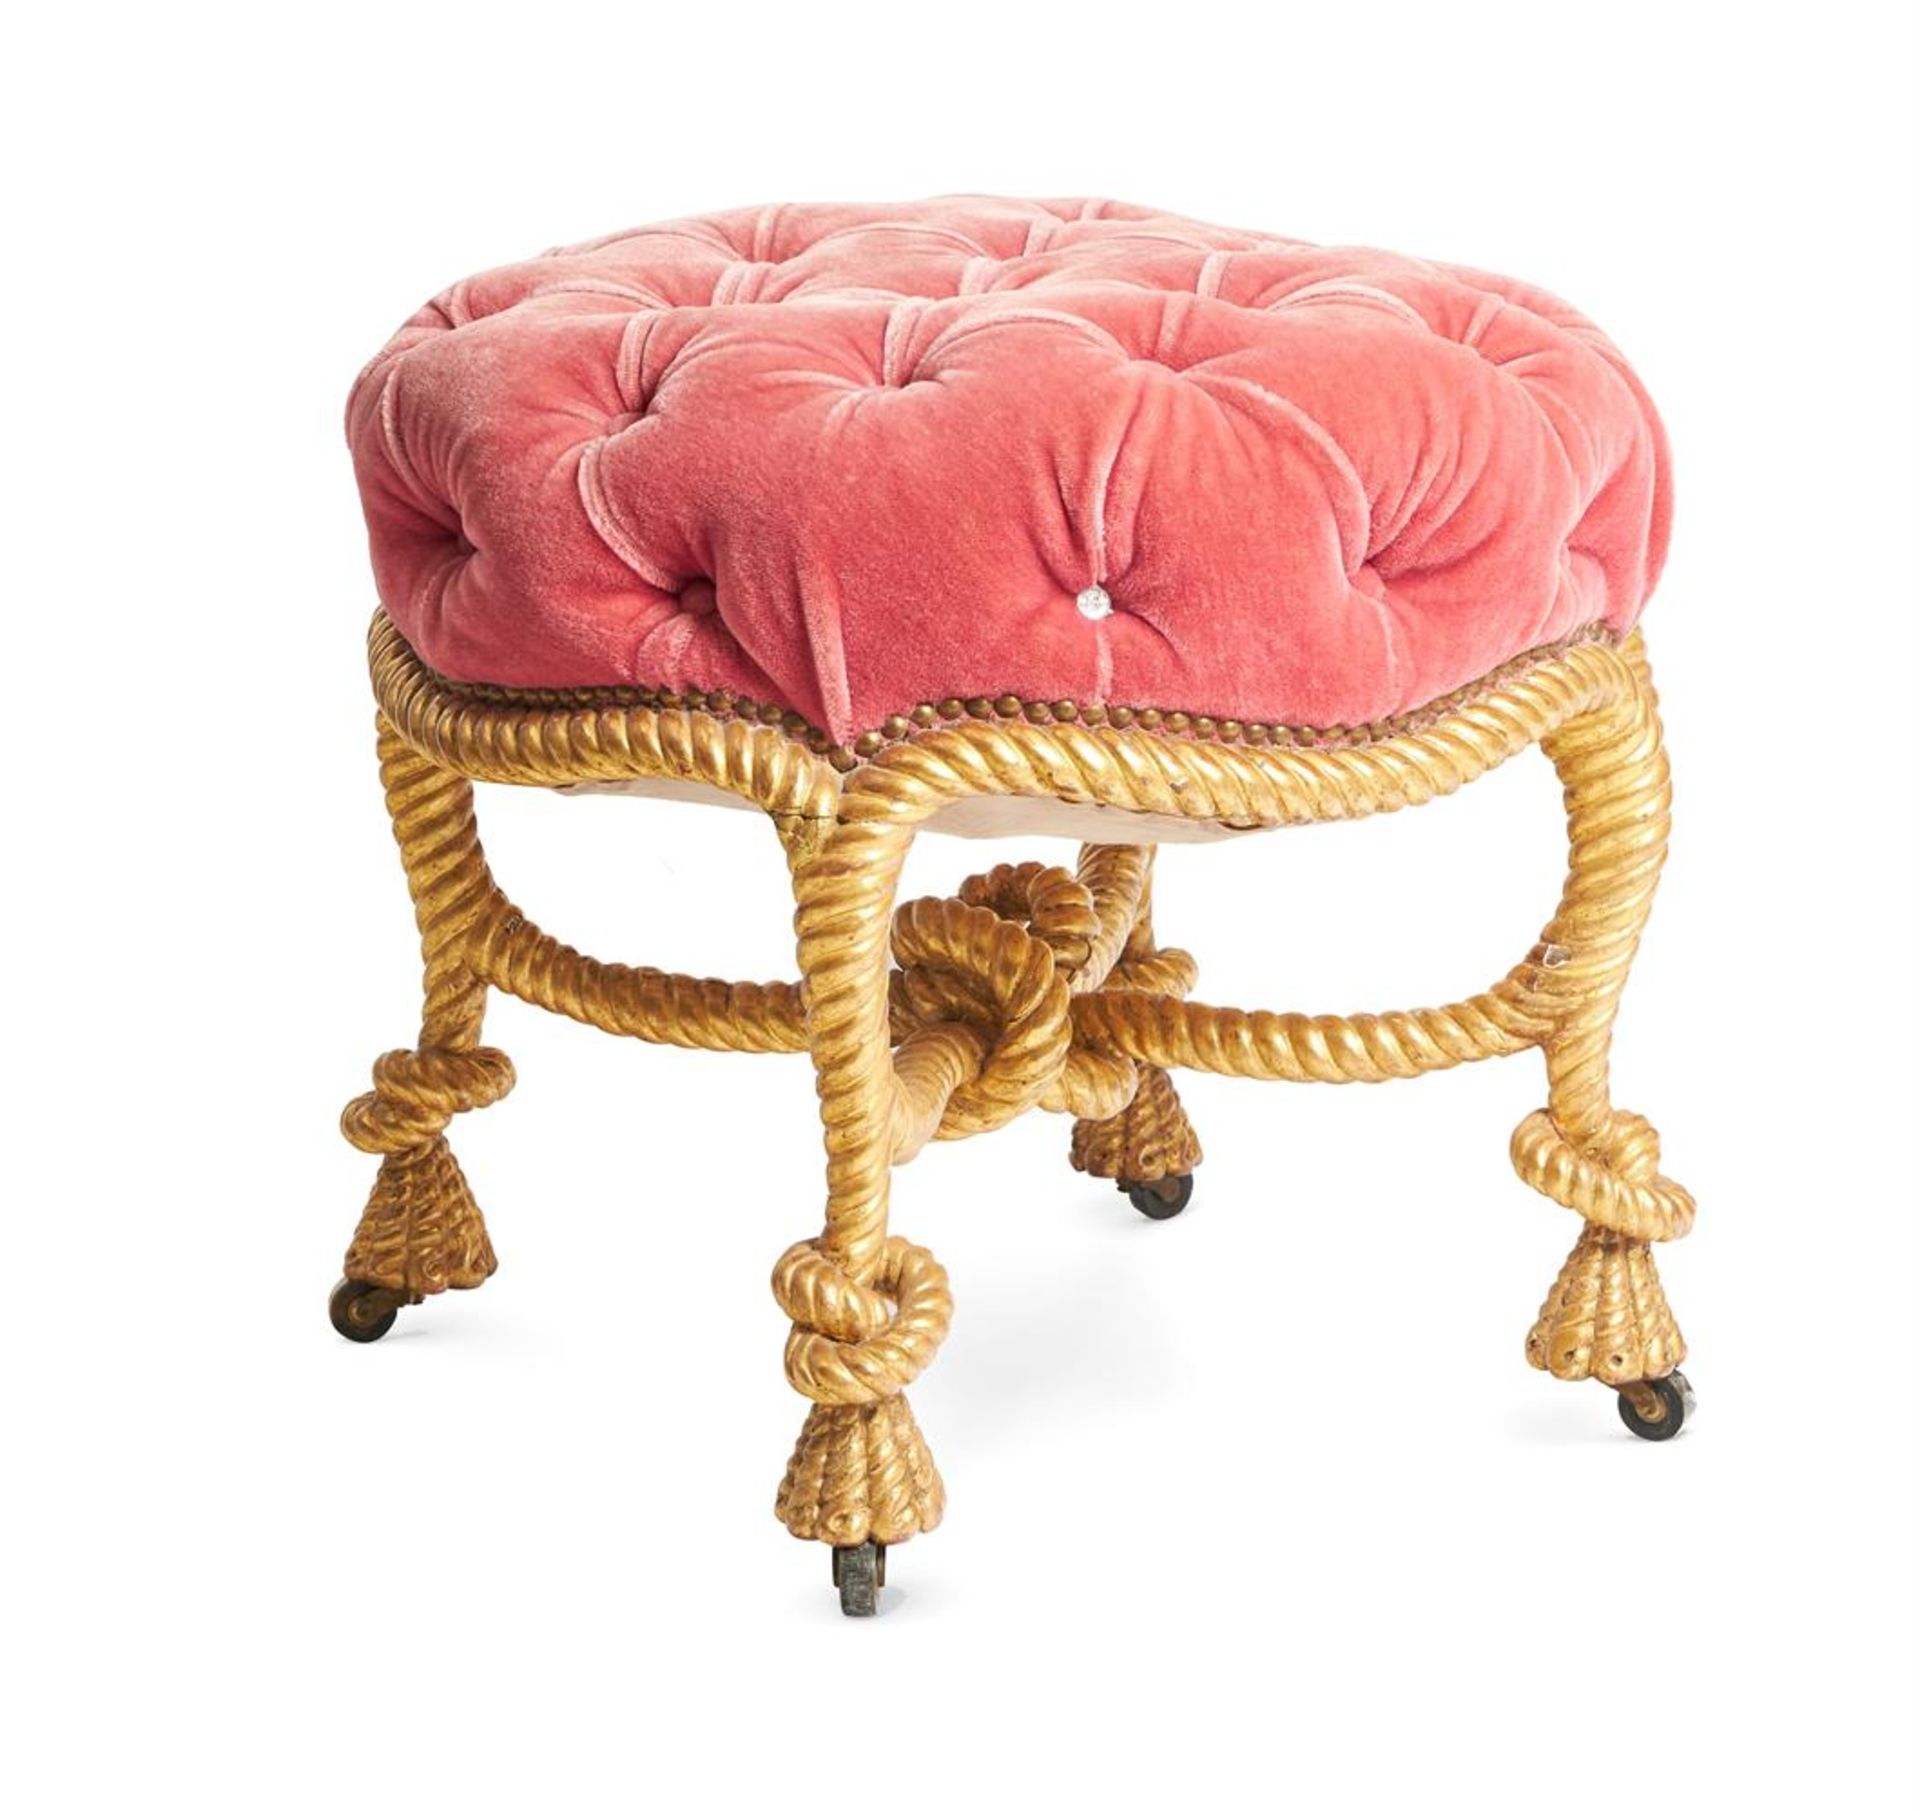 AFTER FOURNIER, A NAPOLEON III CARVED GILTWOOD ROPETWIST STOOL FRENCH, CIRCA 1880